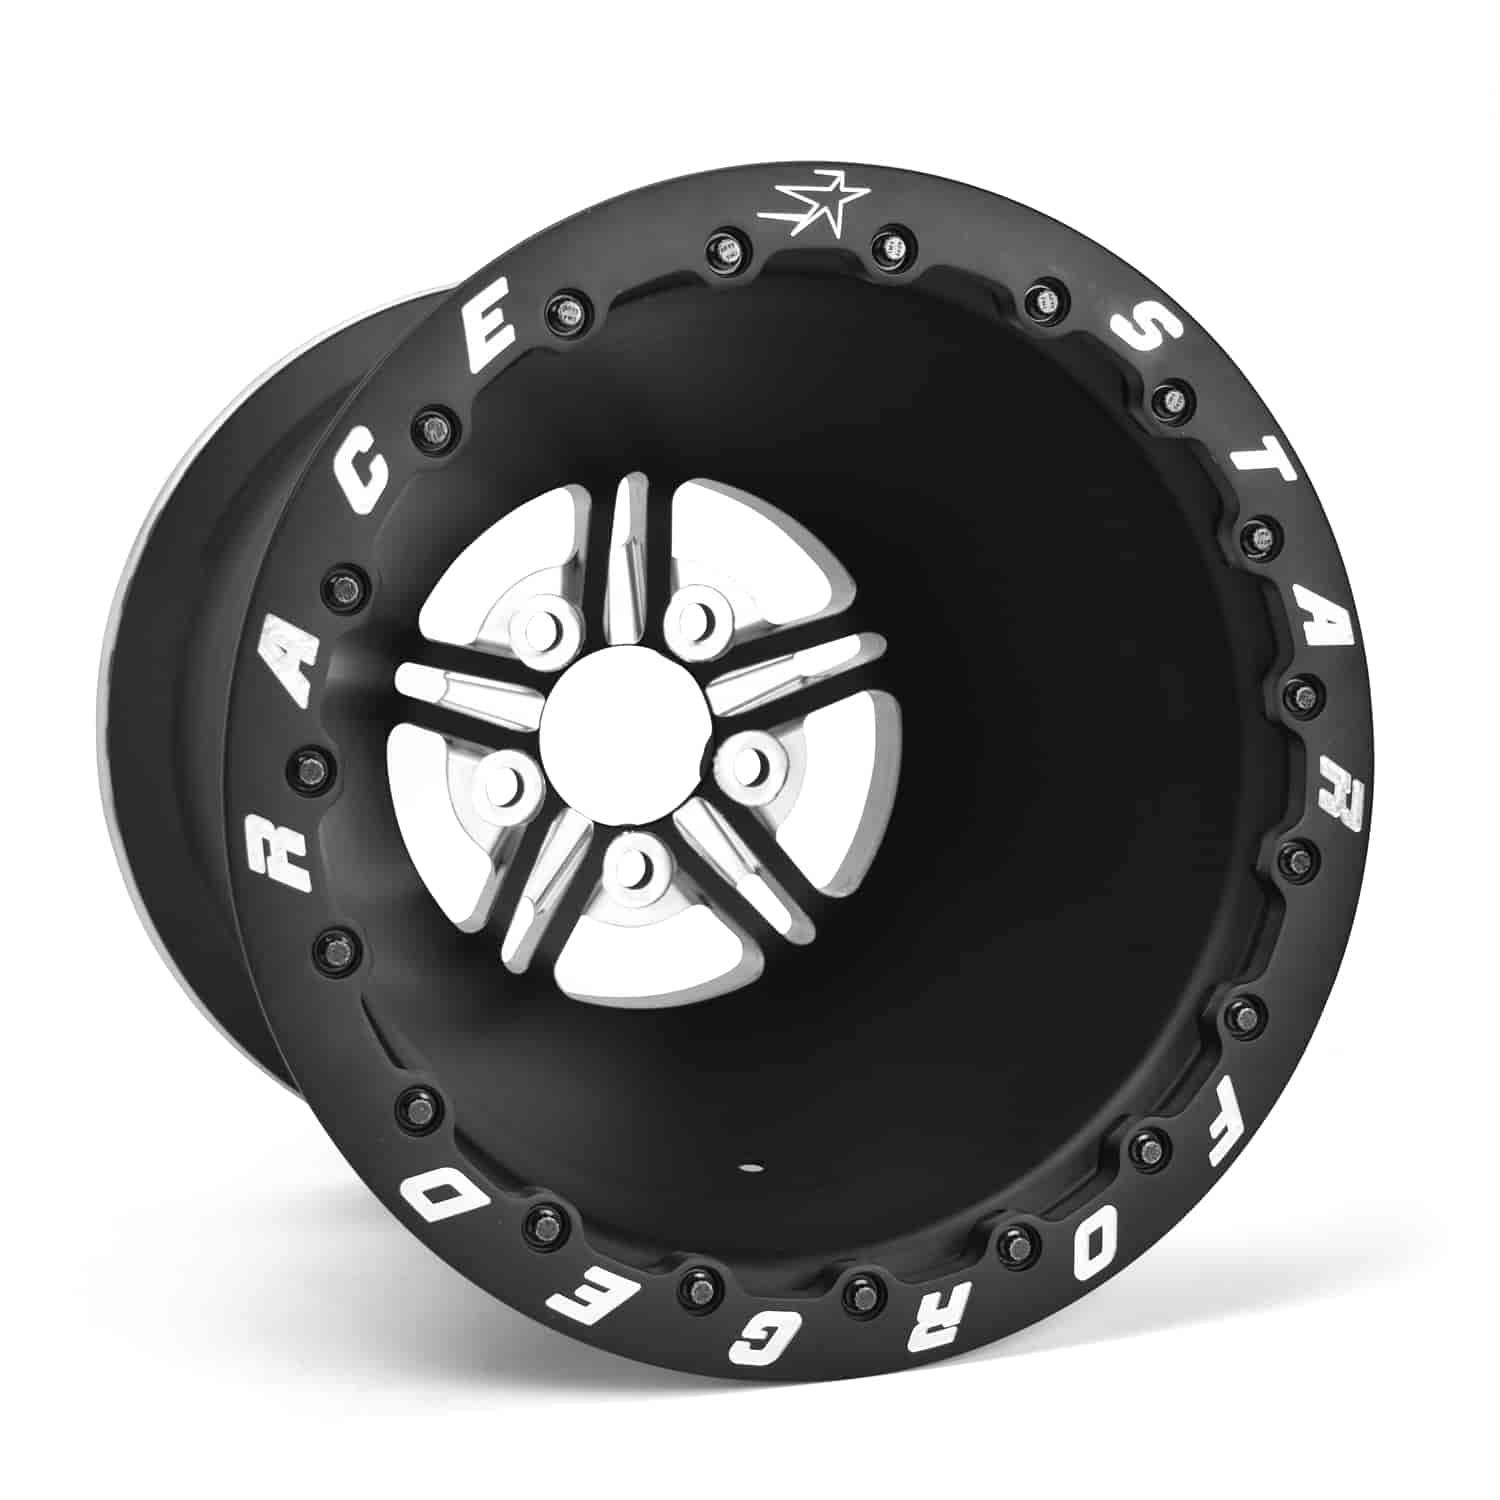 63-Series Pro Forged Double Bead-Lock Wheel Size: 15" x 12"